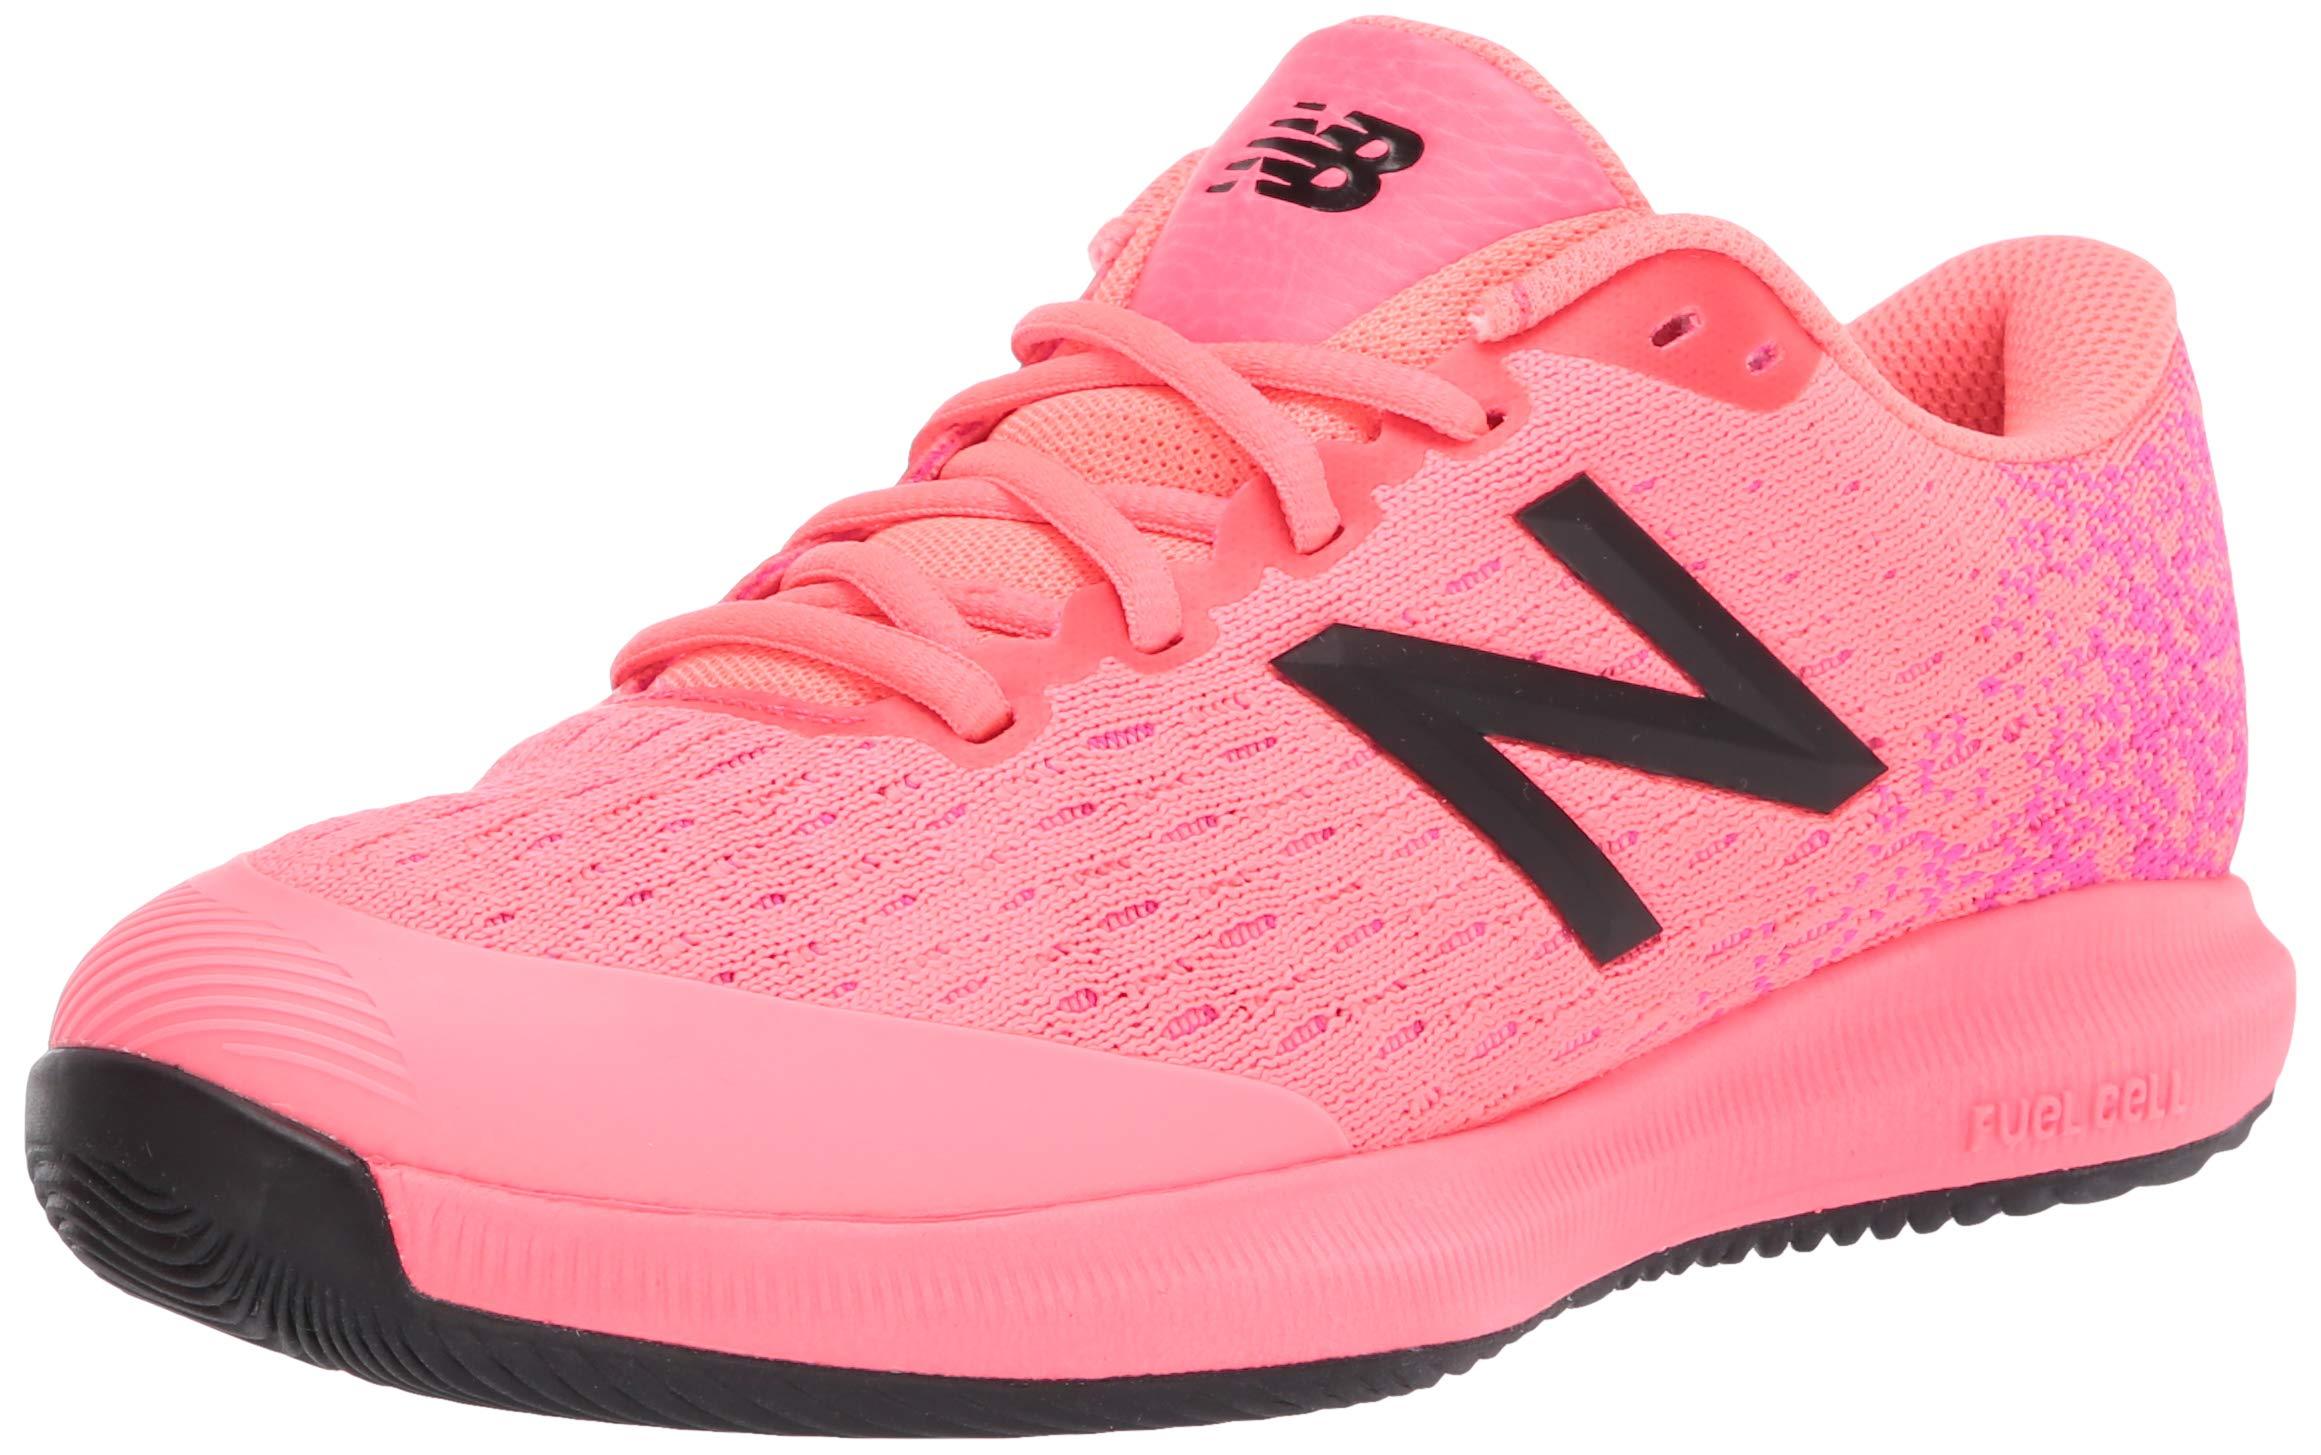 New Balance 996v4 Hard Court Tennis Shoe in Guava/White (Pink 